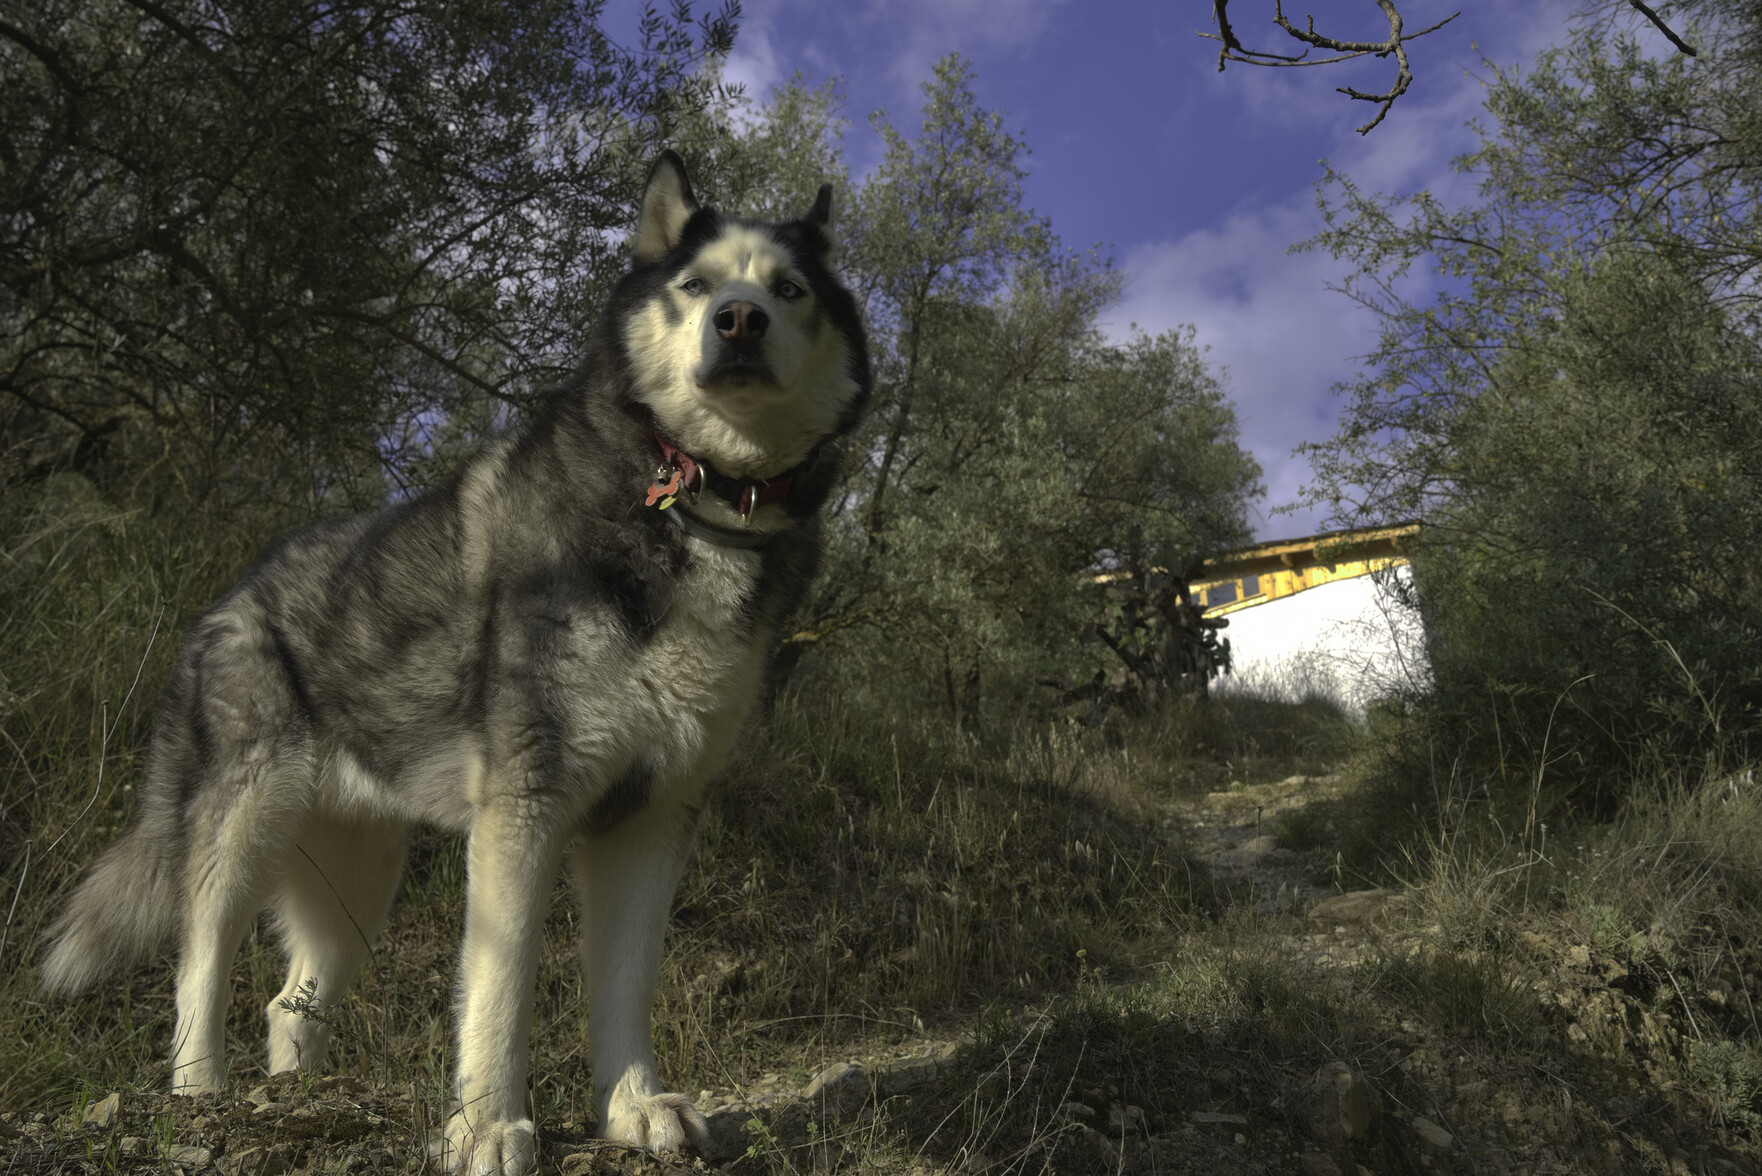 A Siberian husky black and white dog stands in the left foreground. A path runs up to the right to a white building. Above are clouds and blue skies